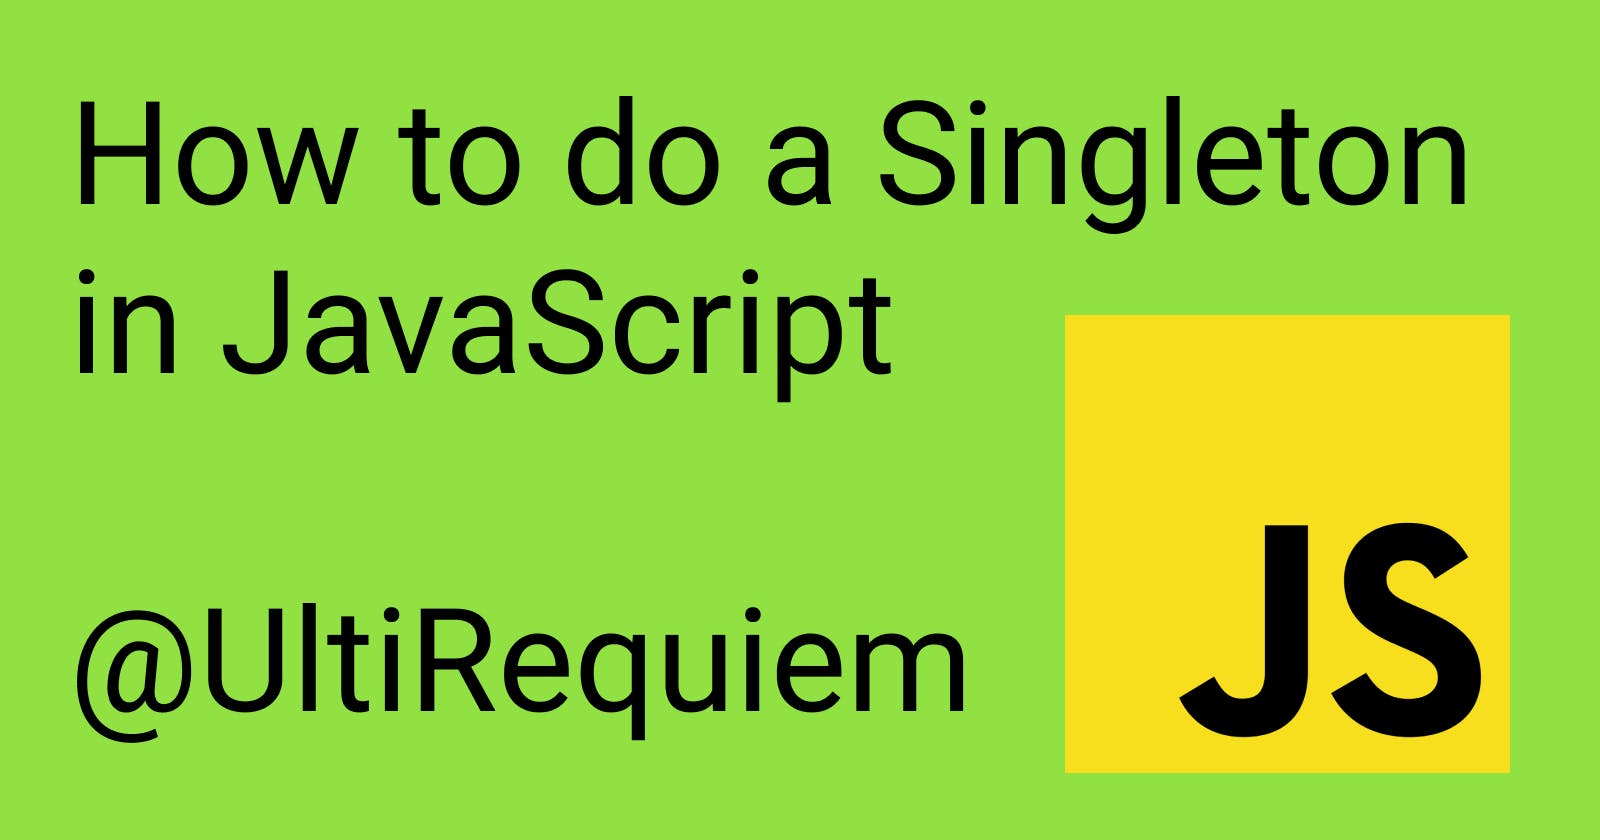 How to do a Singleton in JavaScript